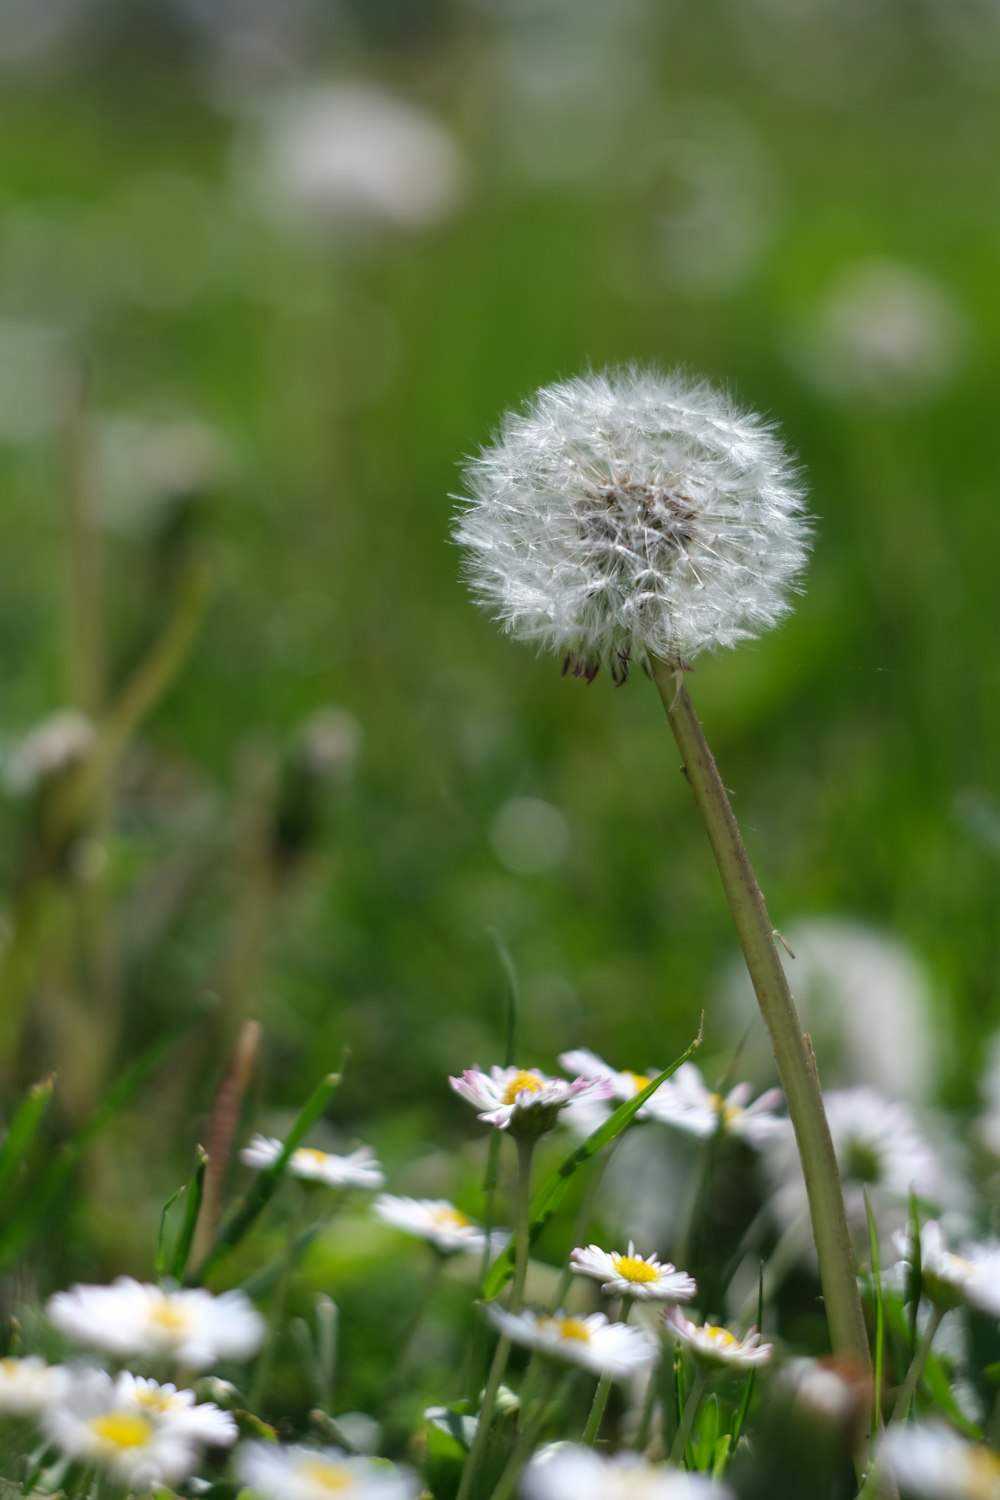 a close up of a dandelion in a field of grass